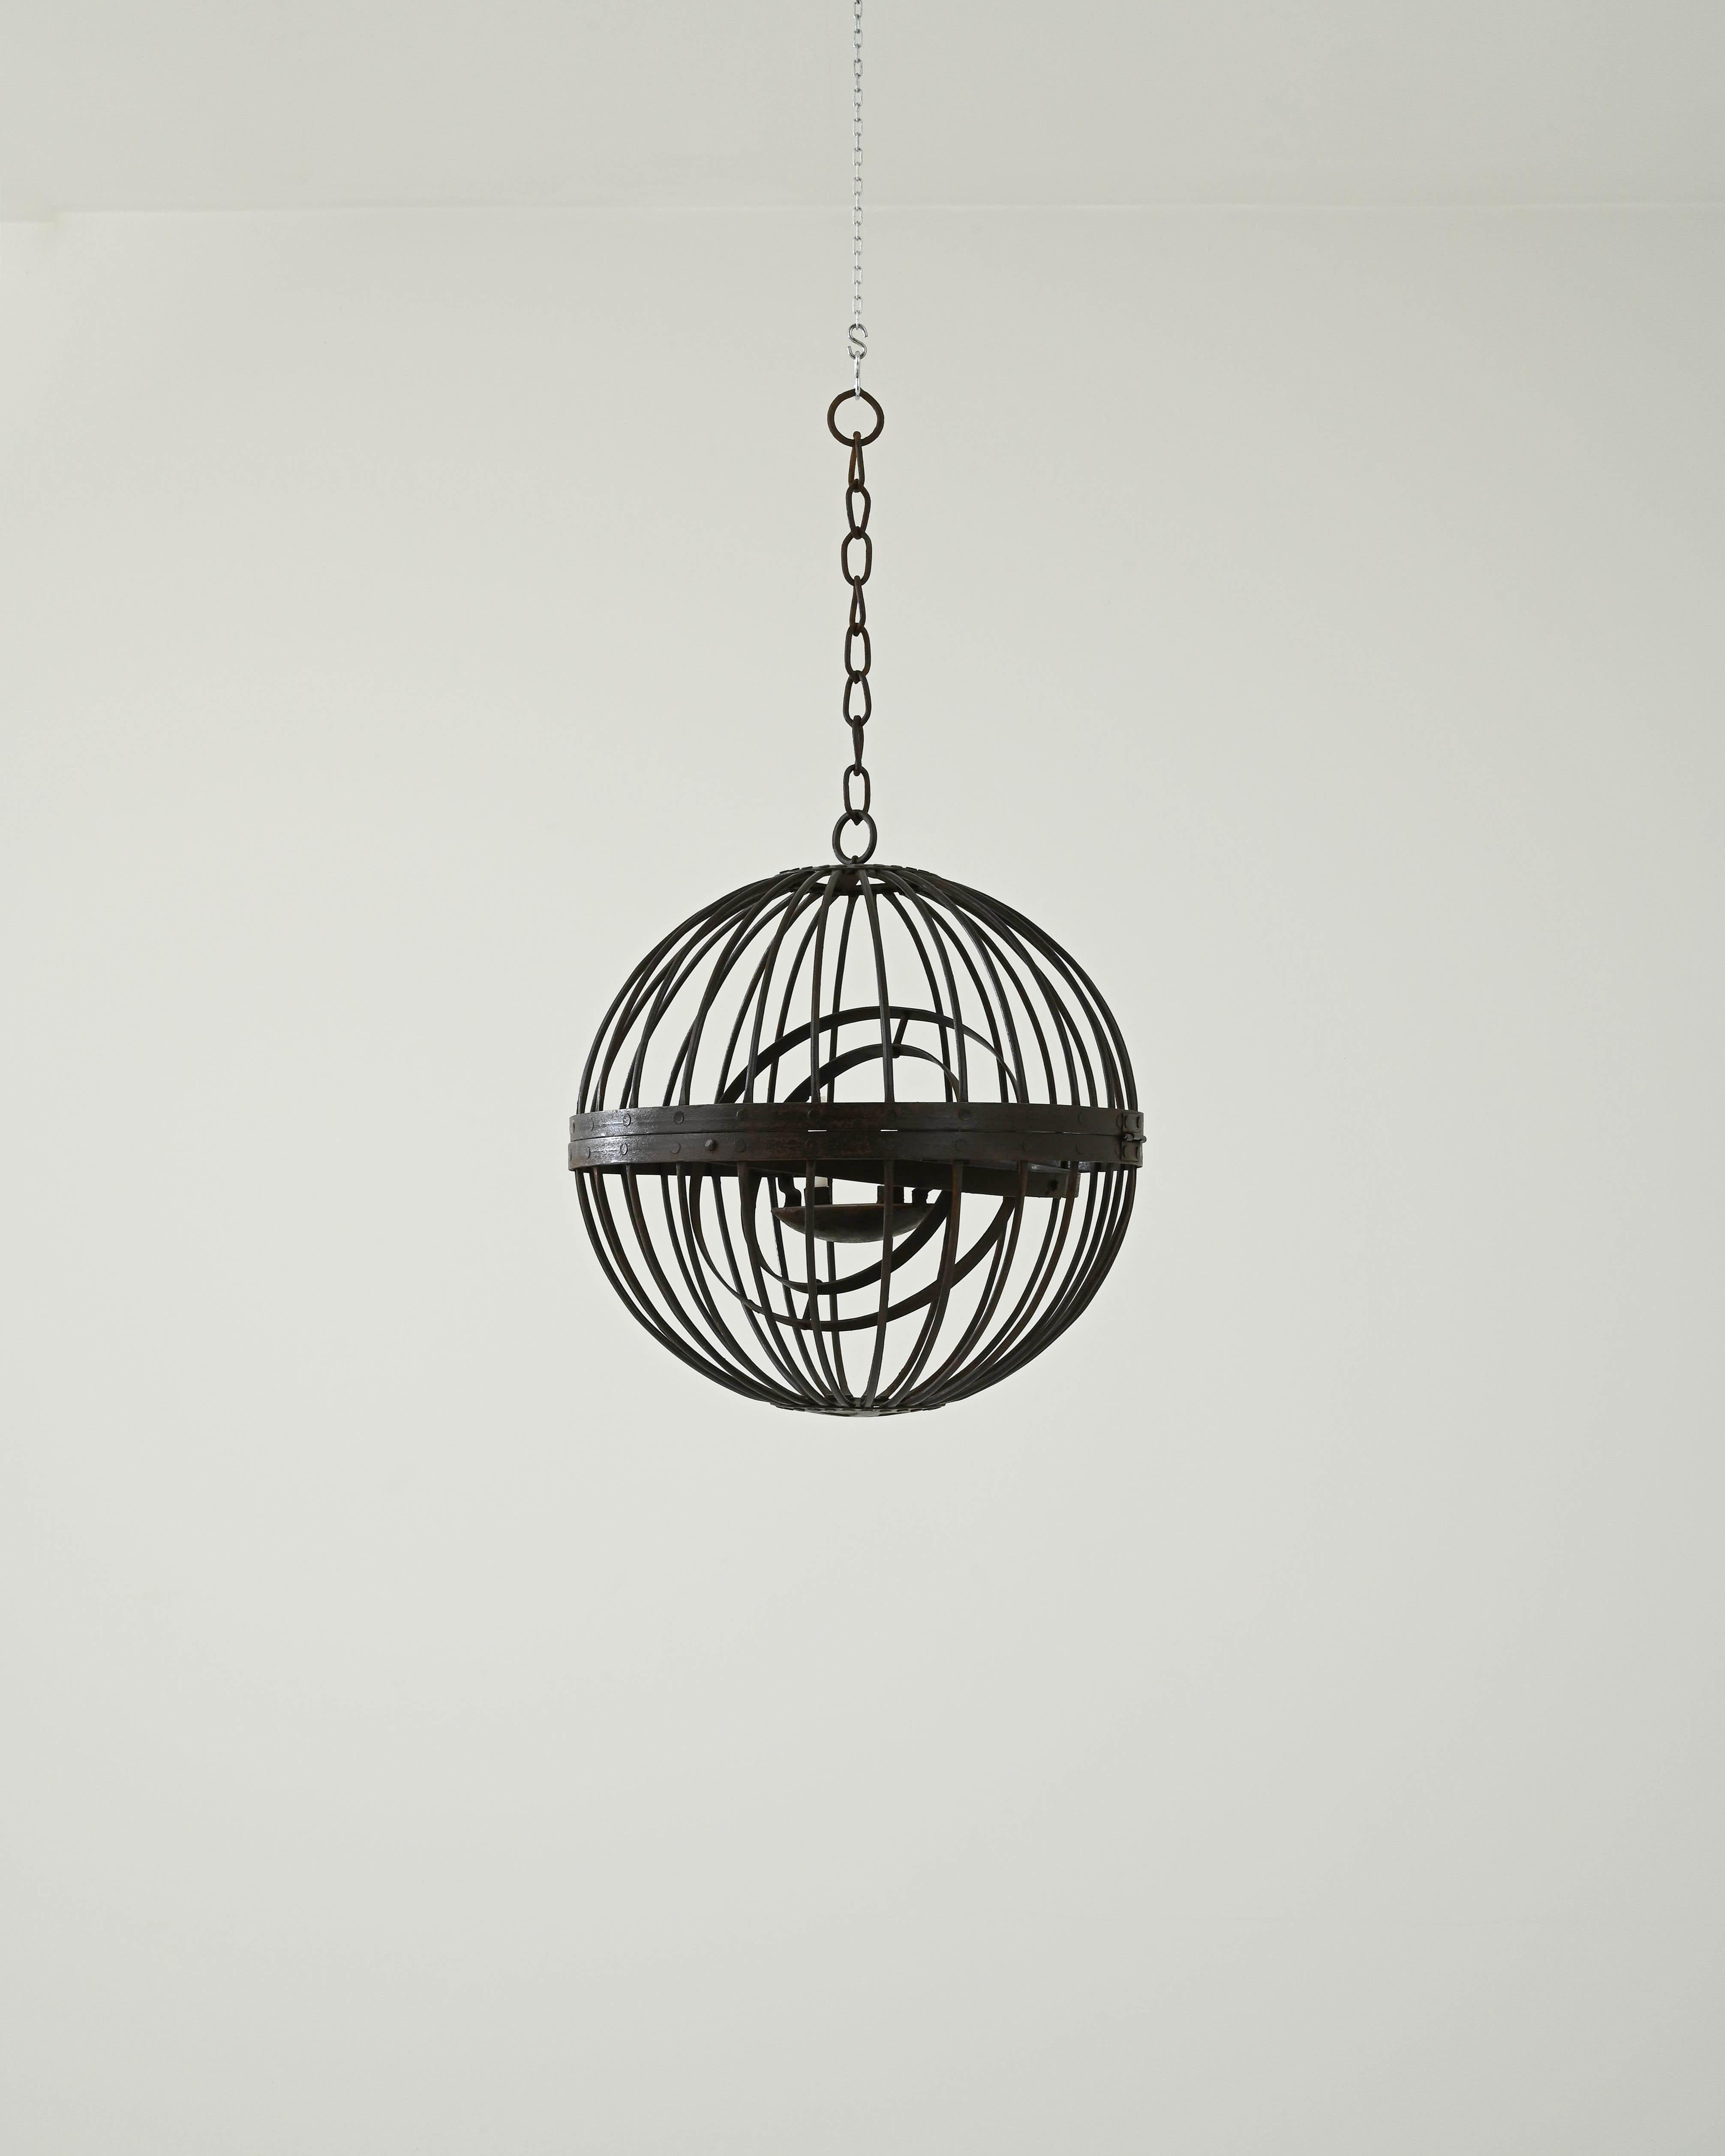 A metal hanging candlestick fixture created in 19th century France. Brimming with neo-gothic inspired style, this spherical candlestick holder offers a traditional yet fresh look. The tilted circular rings set within the curved exterior bars and